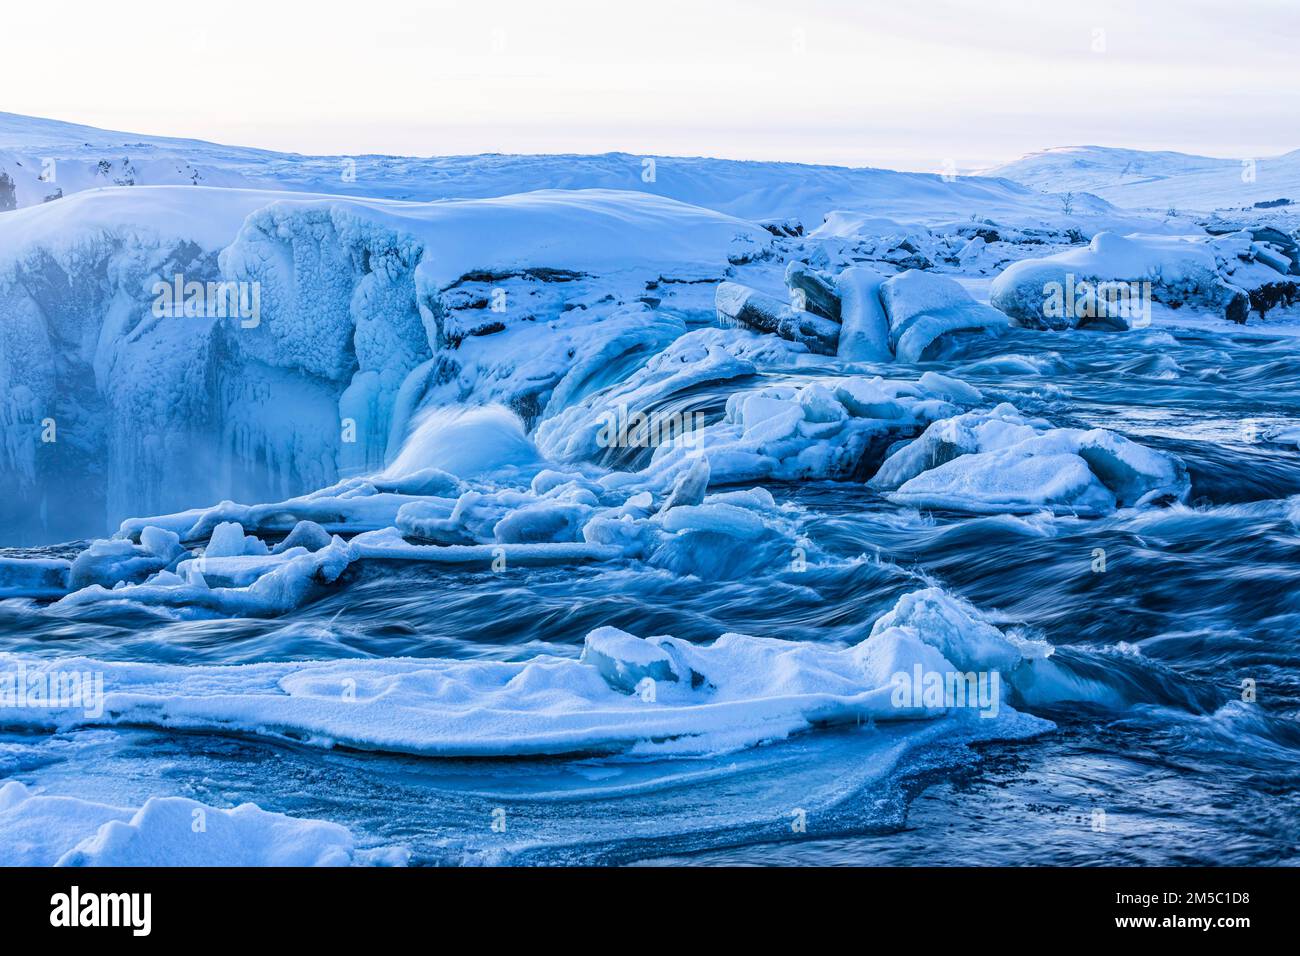 Icefall at the edge of the Godafoss waterfall at dawn, snow-covered landscape, Northern Iceland Eyestra, Iceland Stock Photo